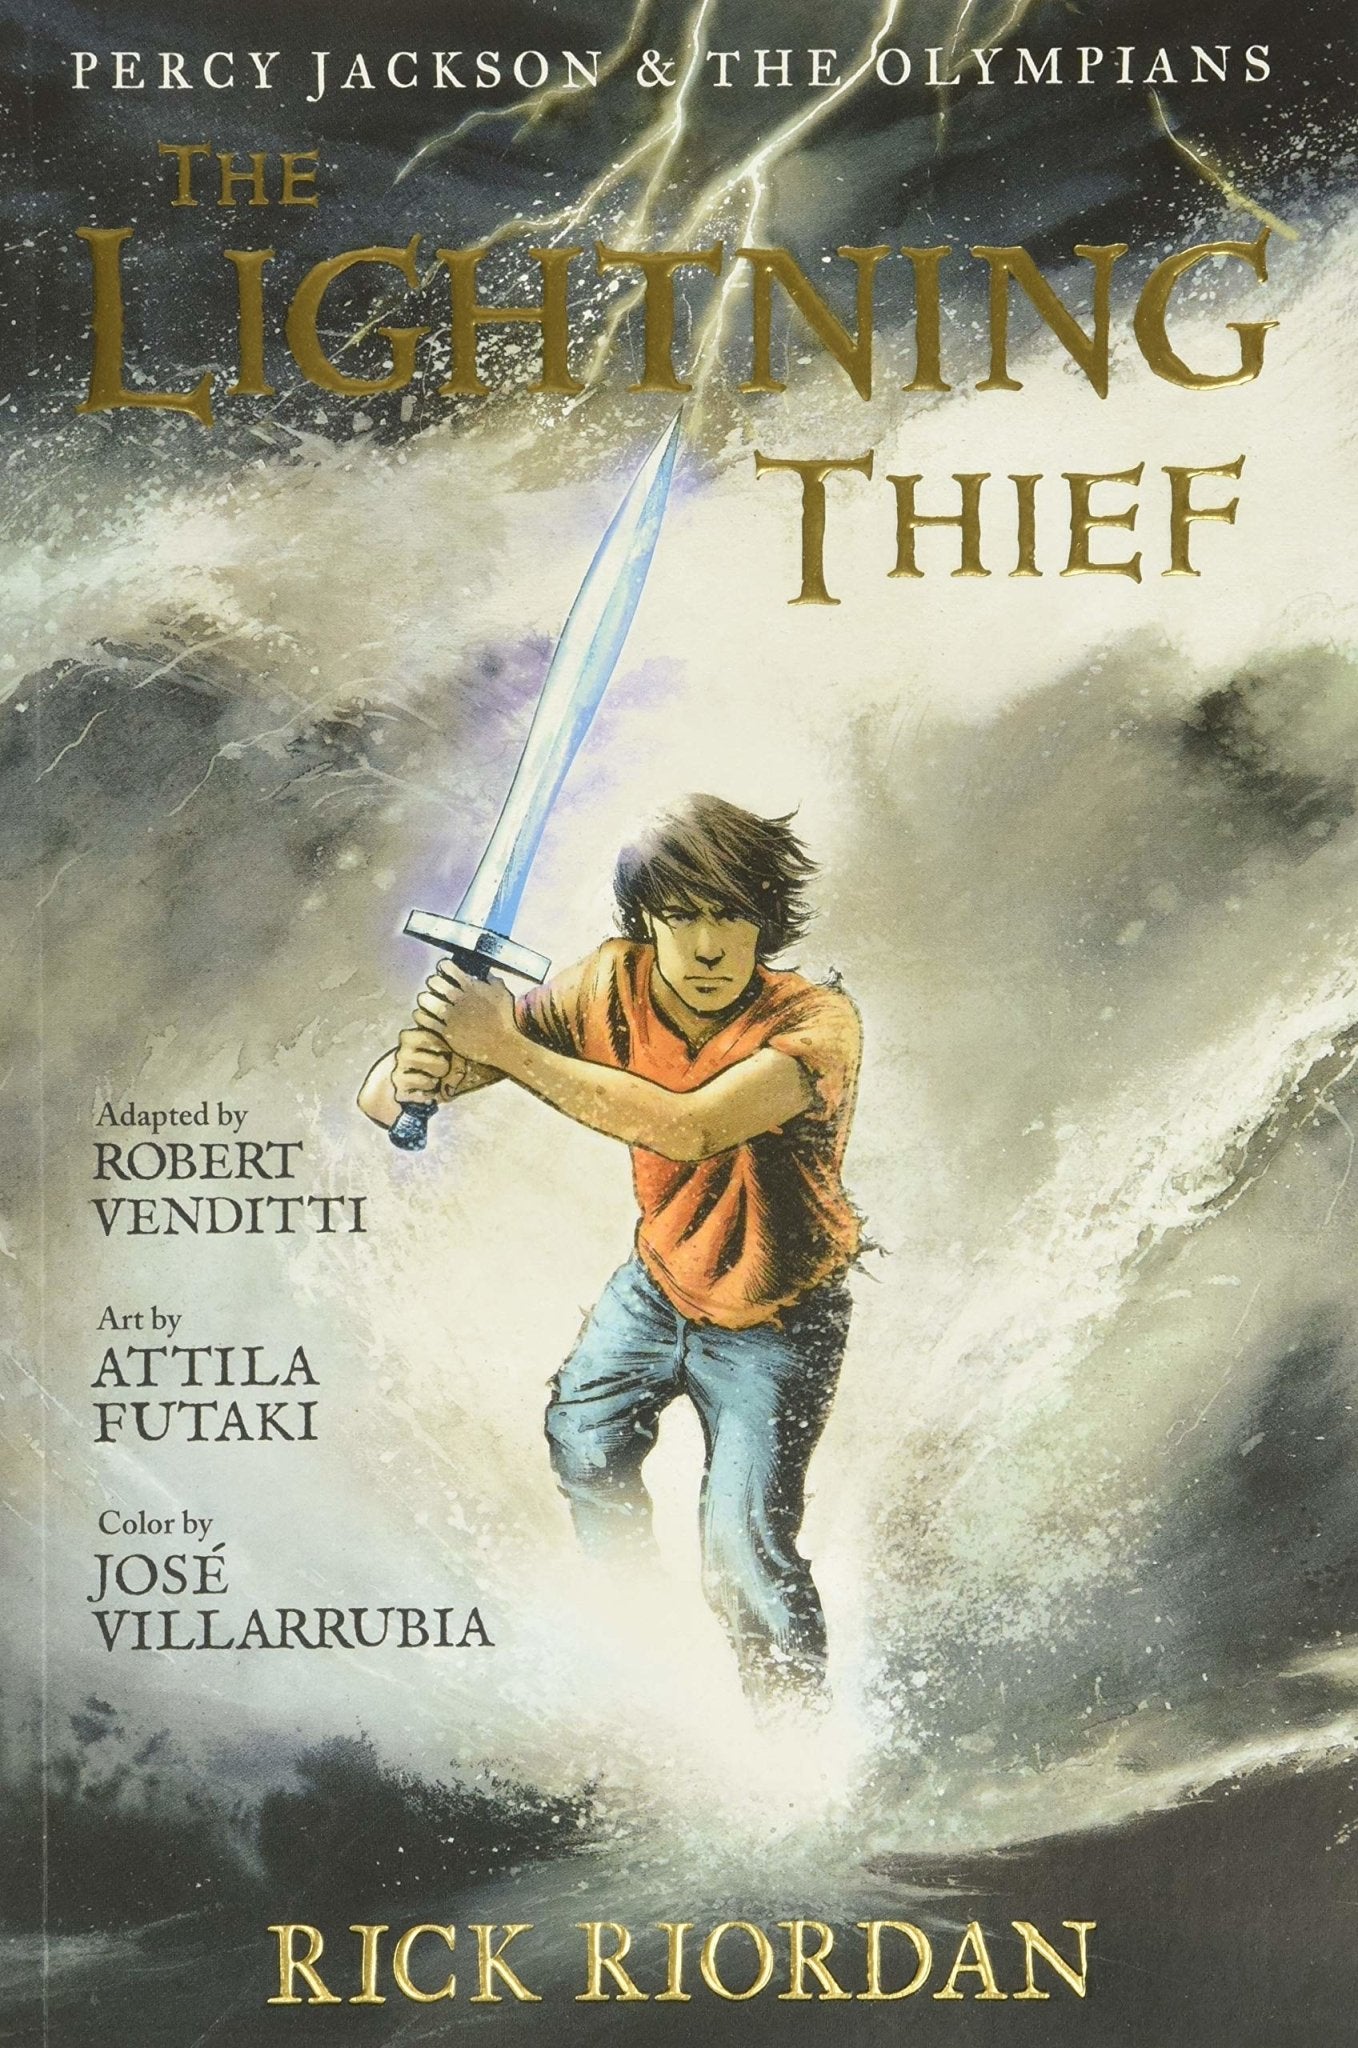 The Lightning Thief: The Graphic Novel (Percy Jackson and the Olympians #1) by Rick Riordan, Robert Venditti [Paperback] - LV'S Global Media